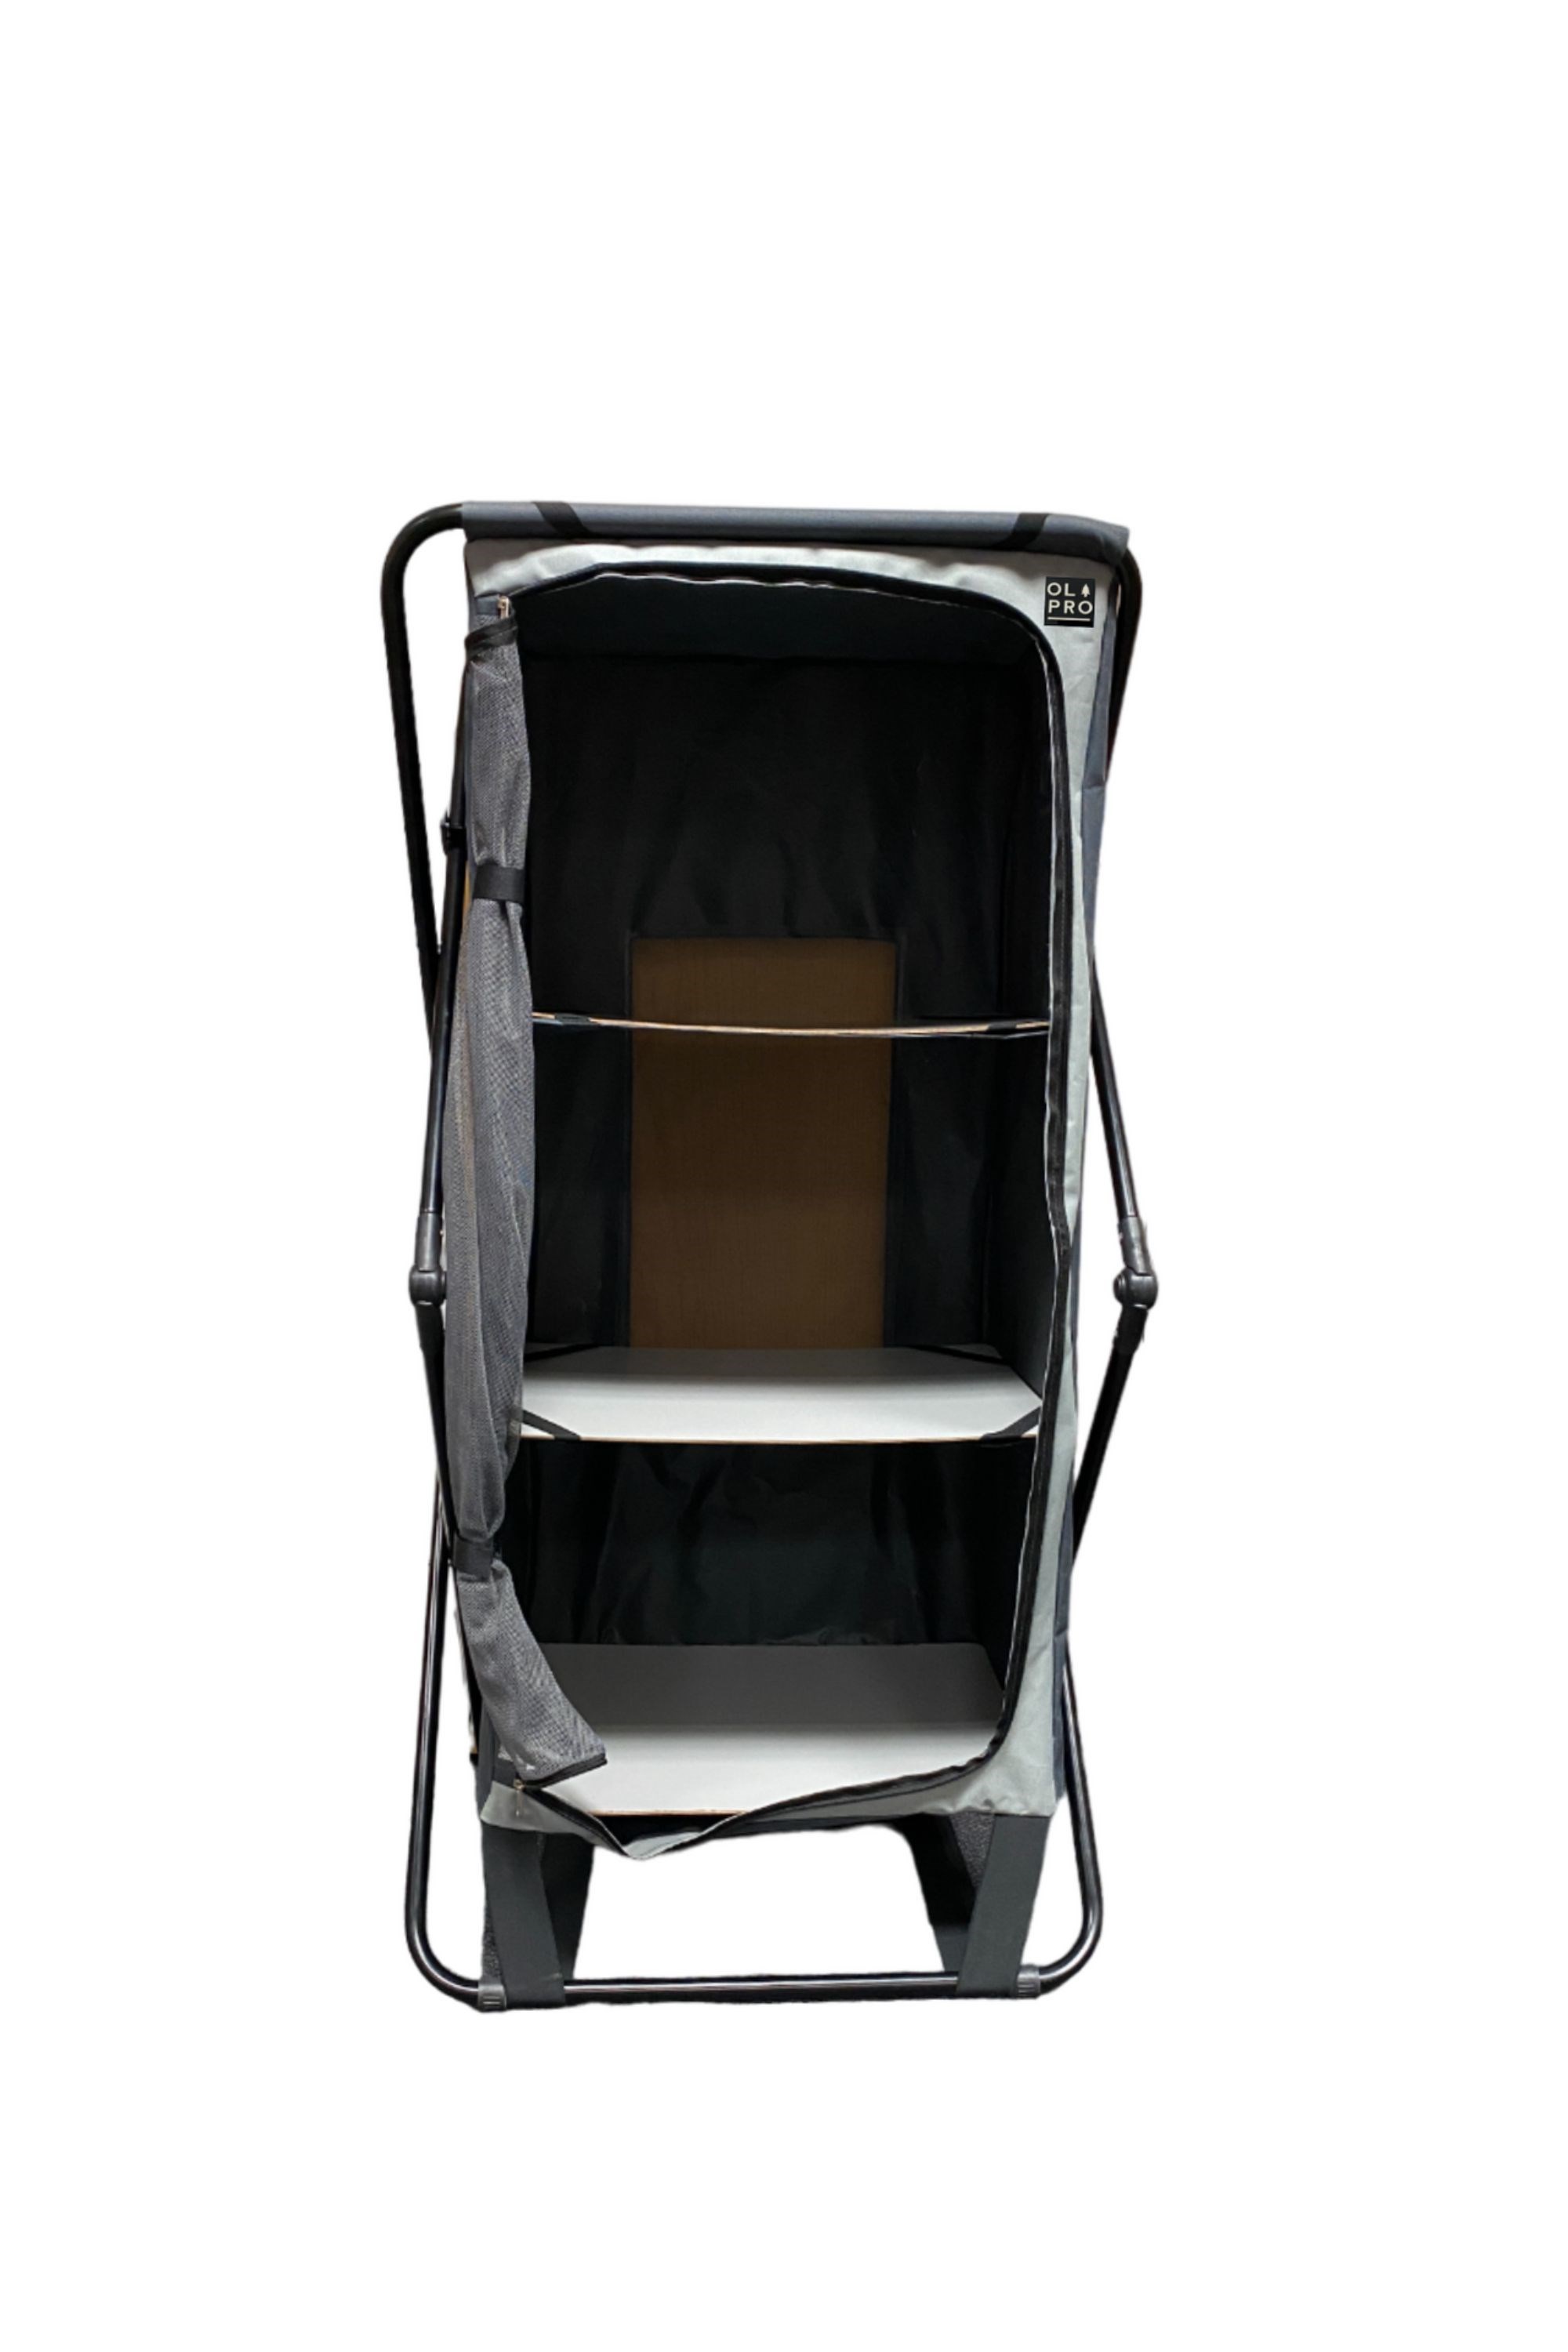 Collapsible Camp Storage Organiser -